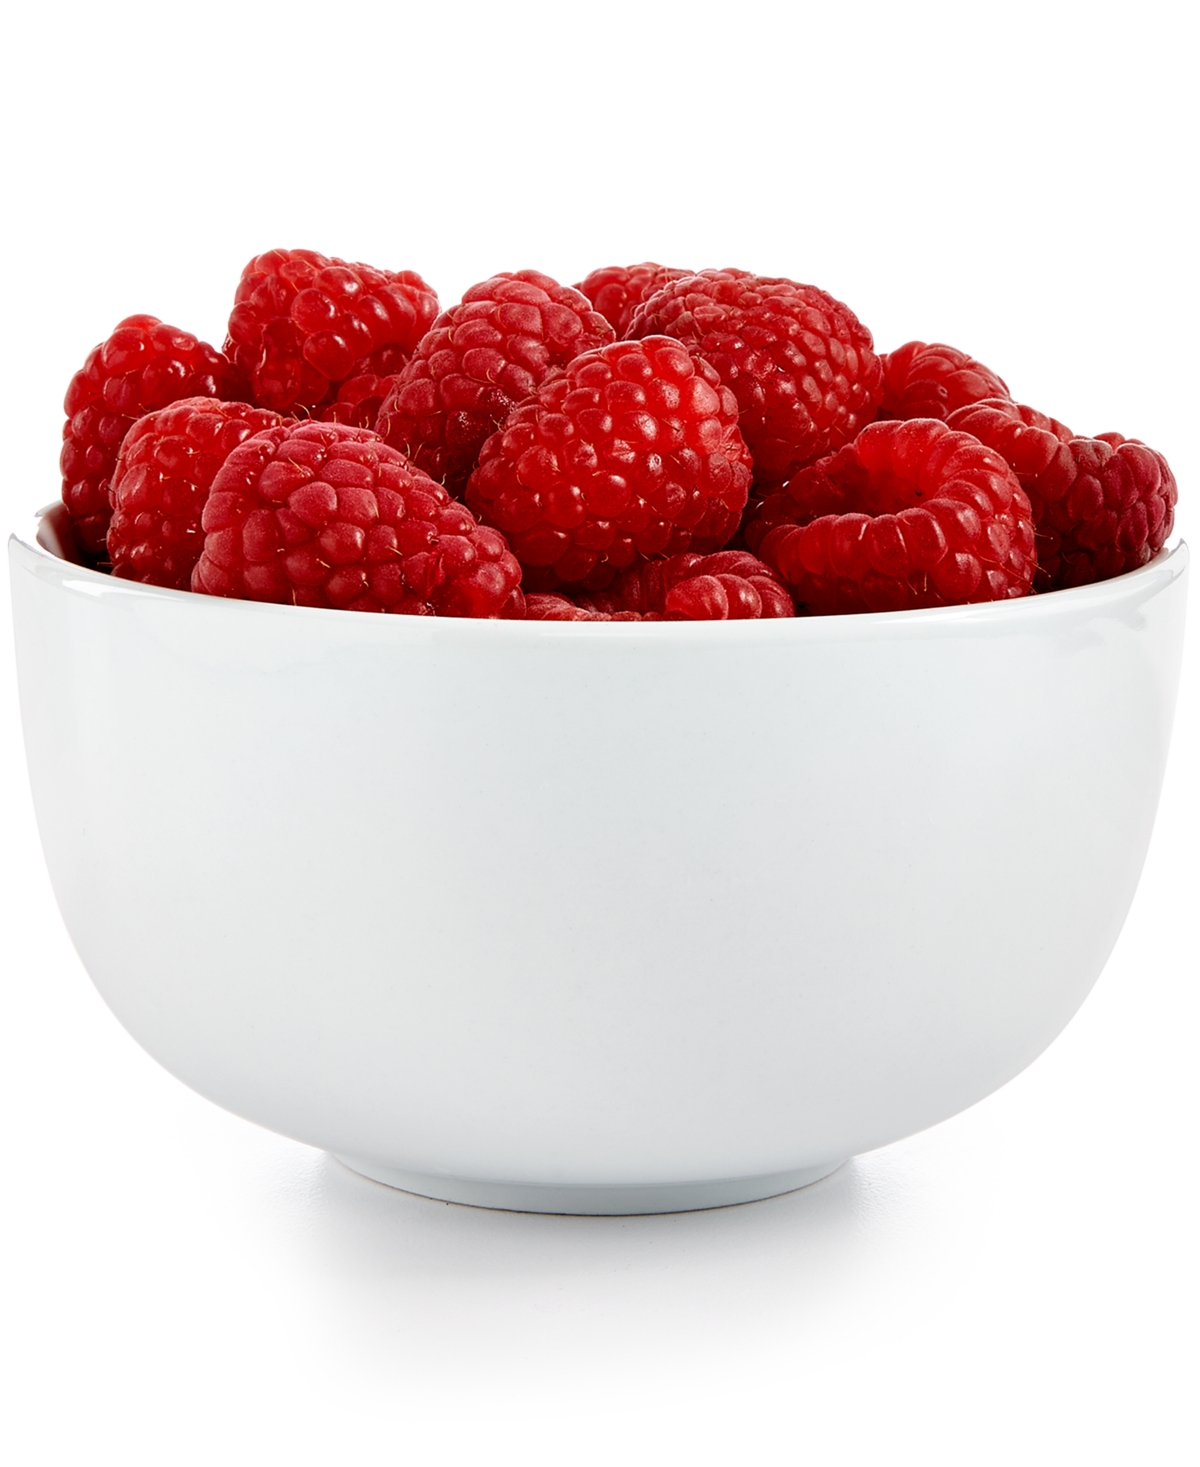 The Cellar Whiteware Round Fruit Bowl, Created for Macy's